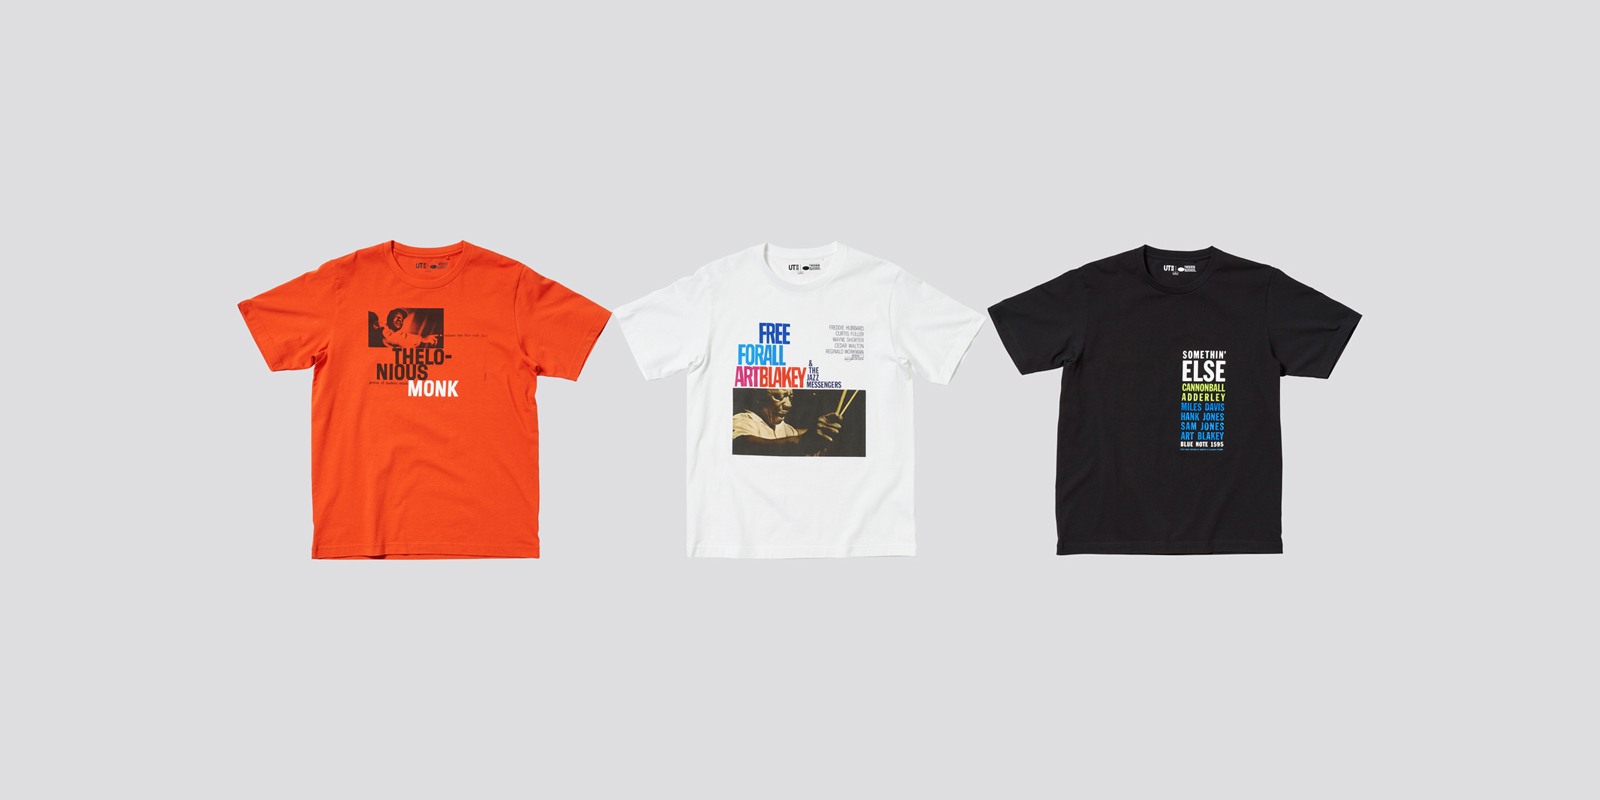 BLUE NOTE & UNIQLO COLLABORATE ON A NEW UT T-SHIRT COLLECTION